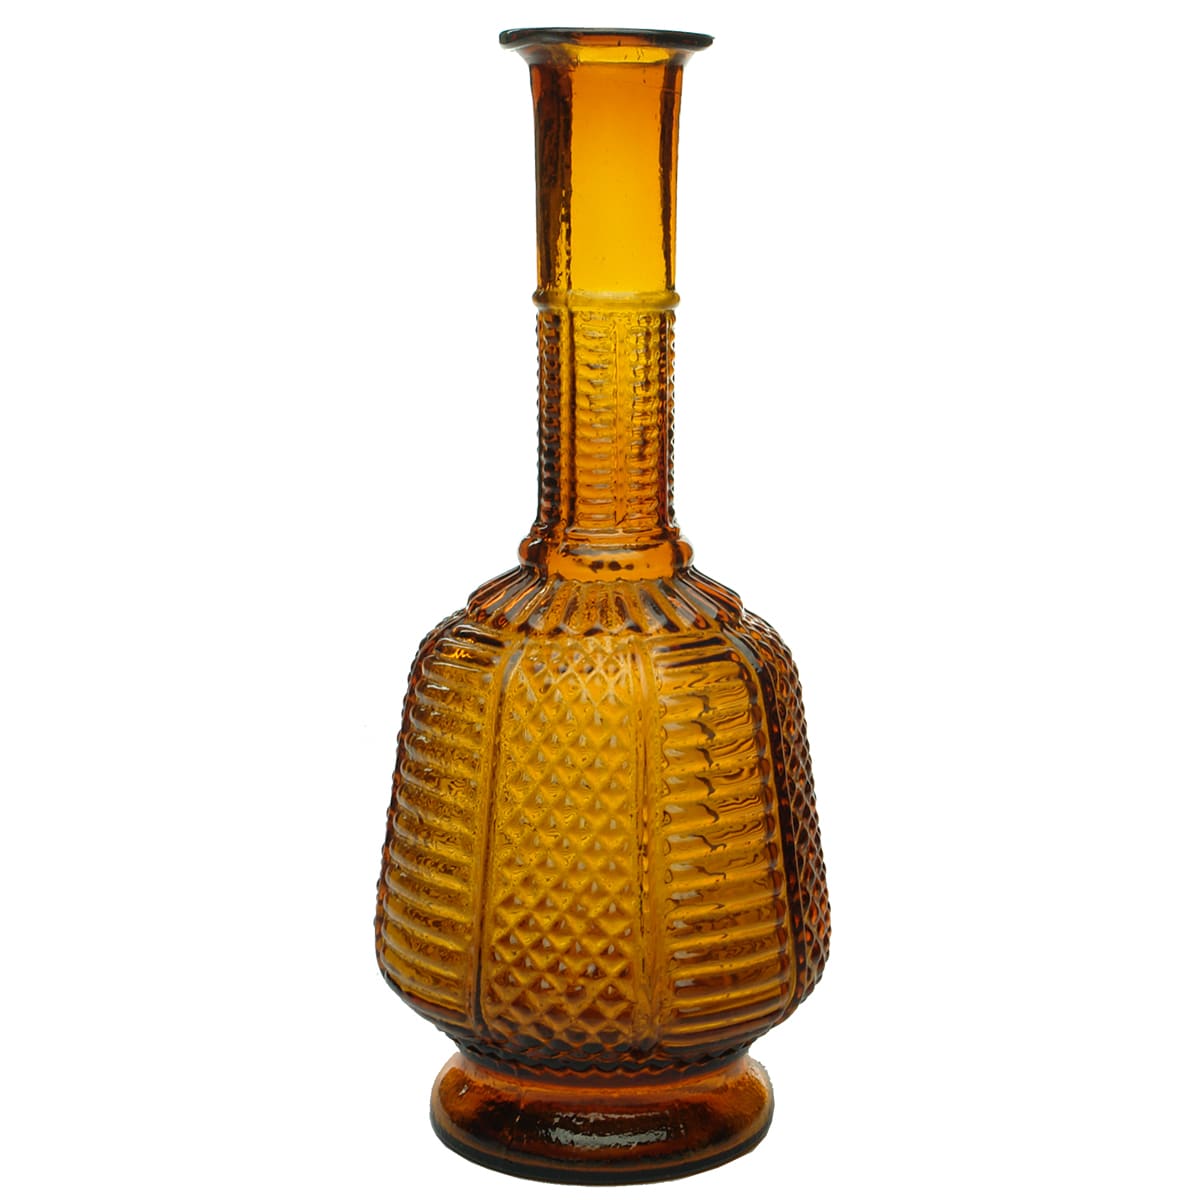 Table Sauce or similar. Alternating Diamond Point & Bars to eight sides. Bars up the neck. Smooth base. Orange Amber.